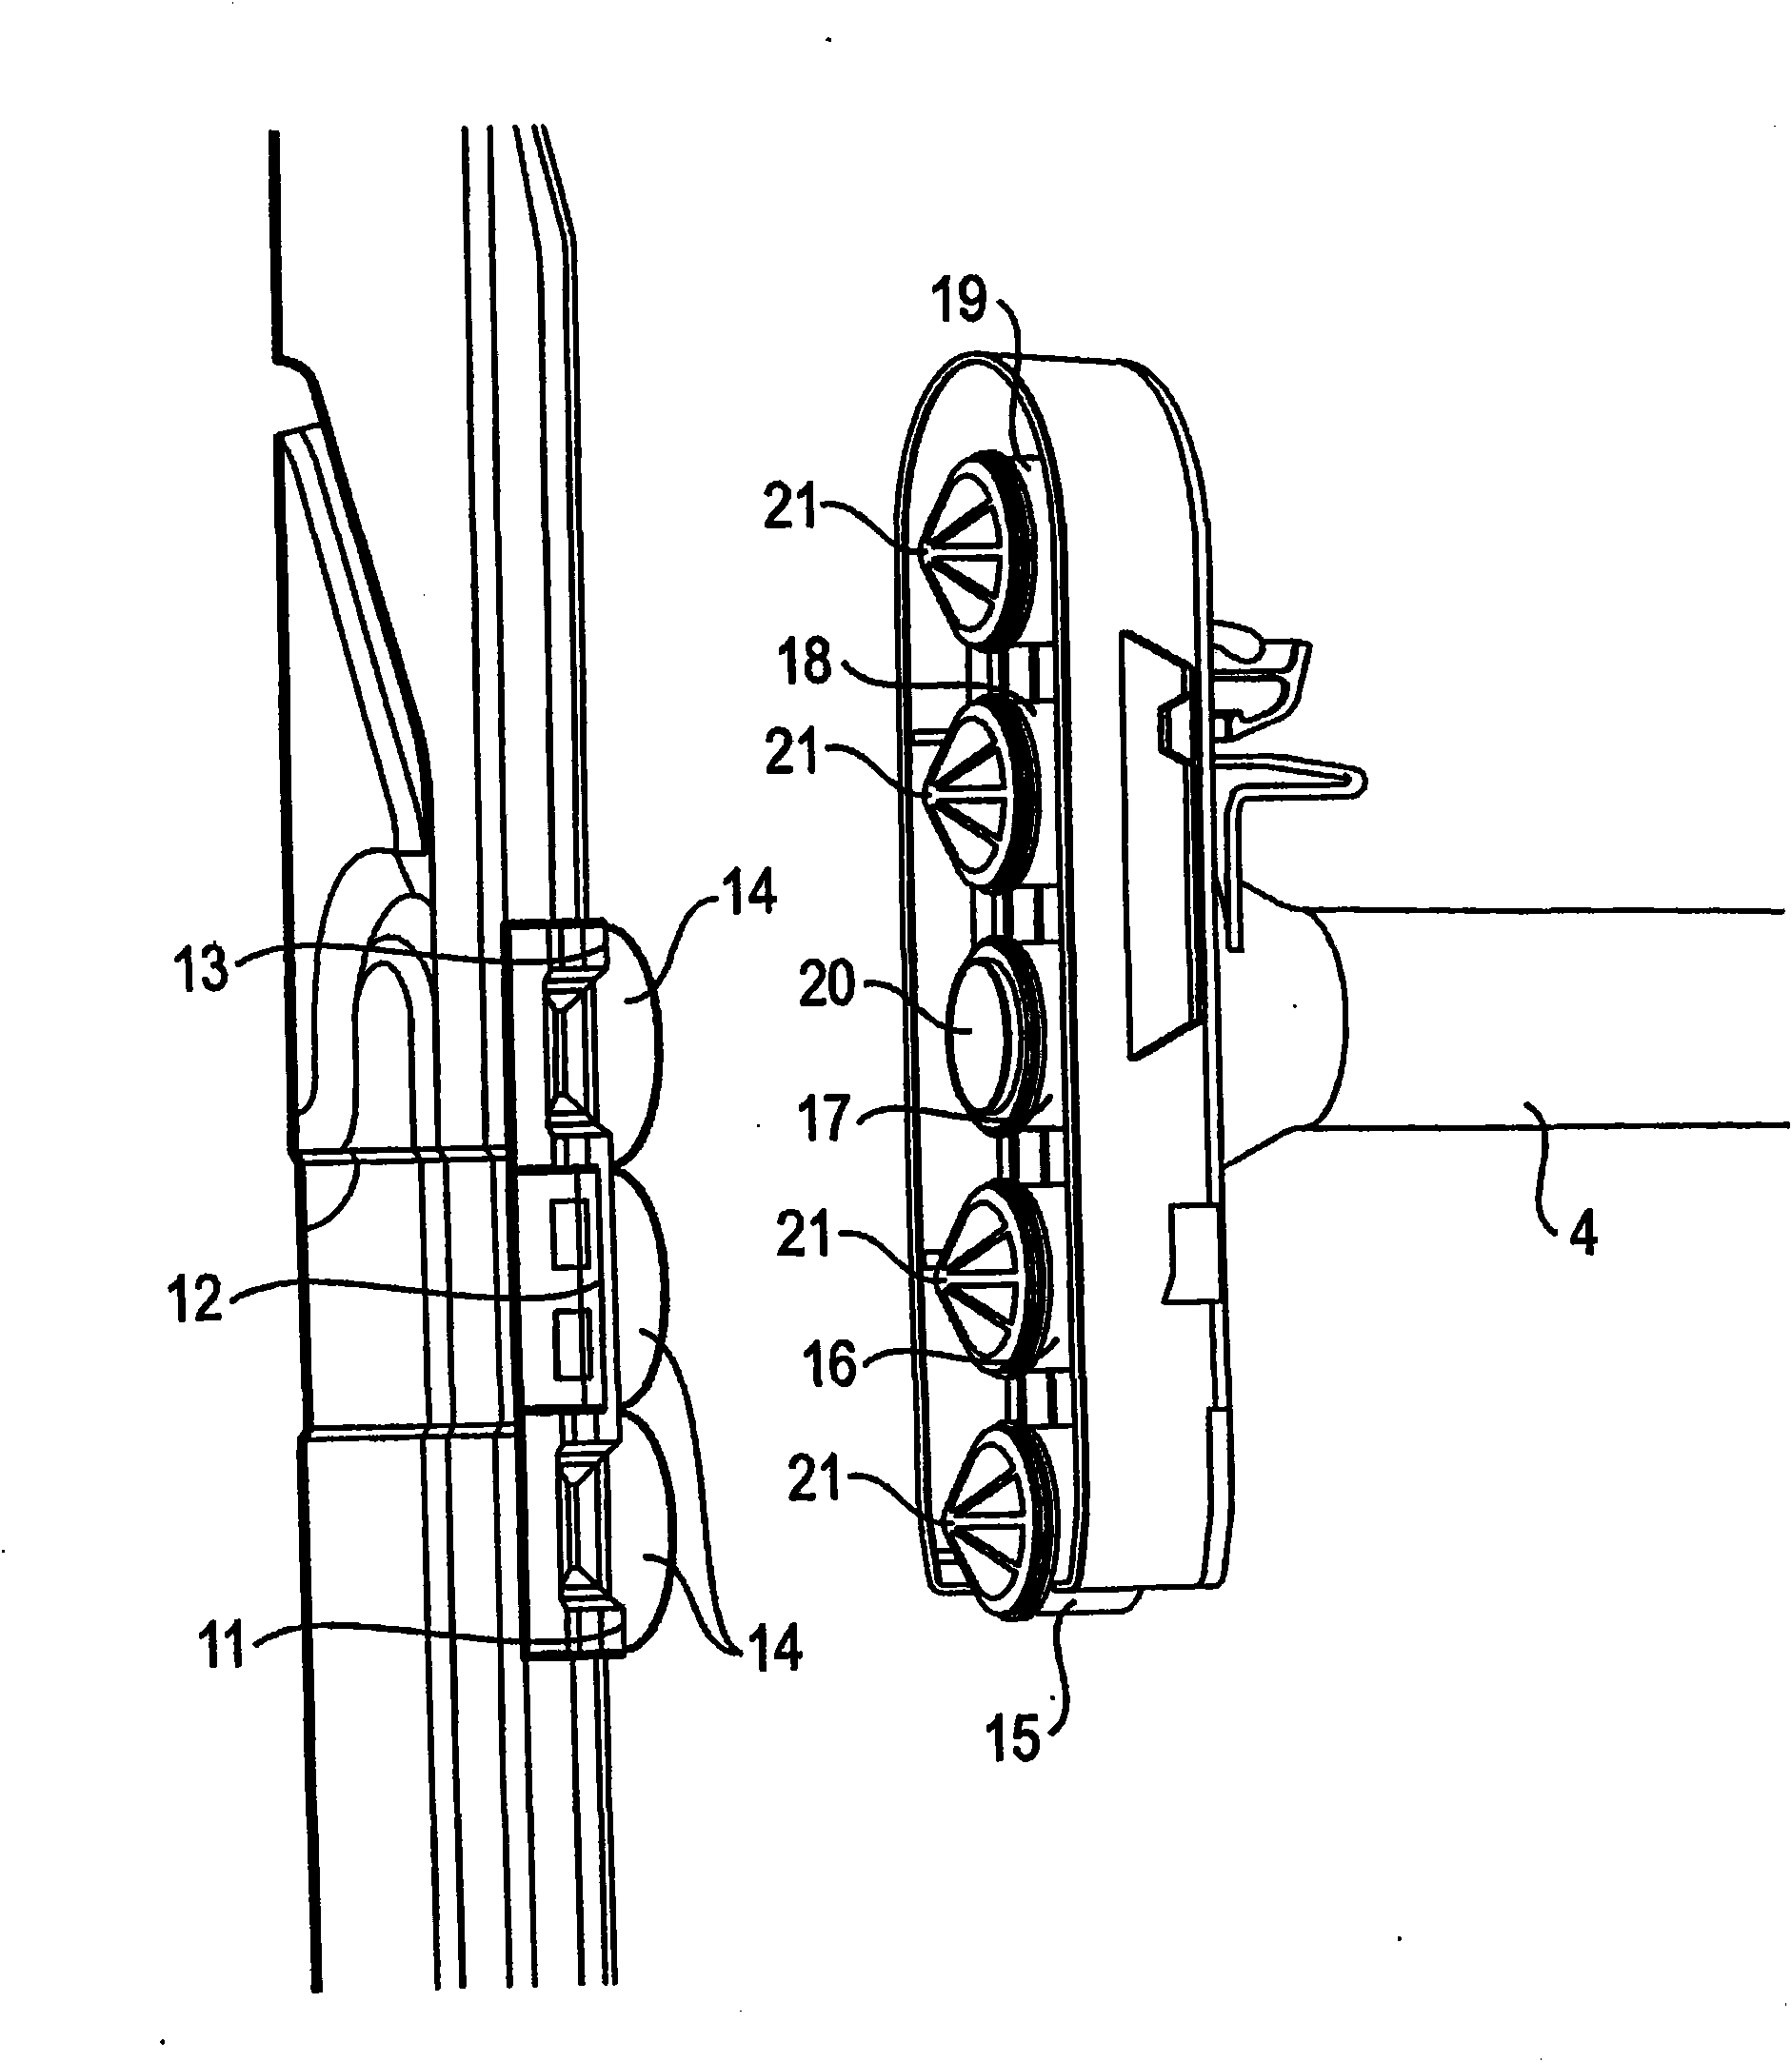 Hydraulic coupling of a vertically adjustable dish basket of a dishwasher